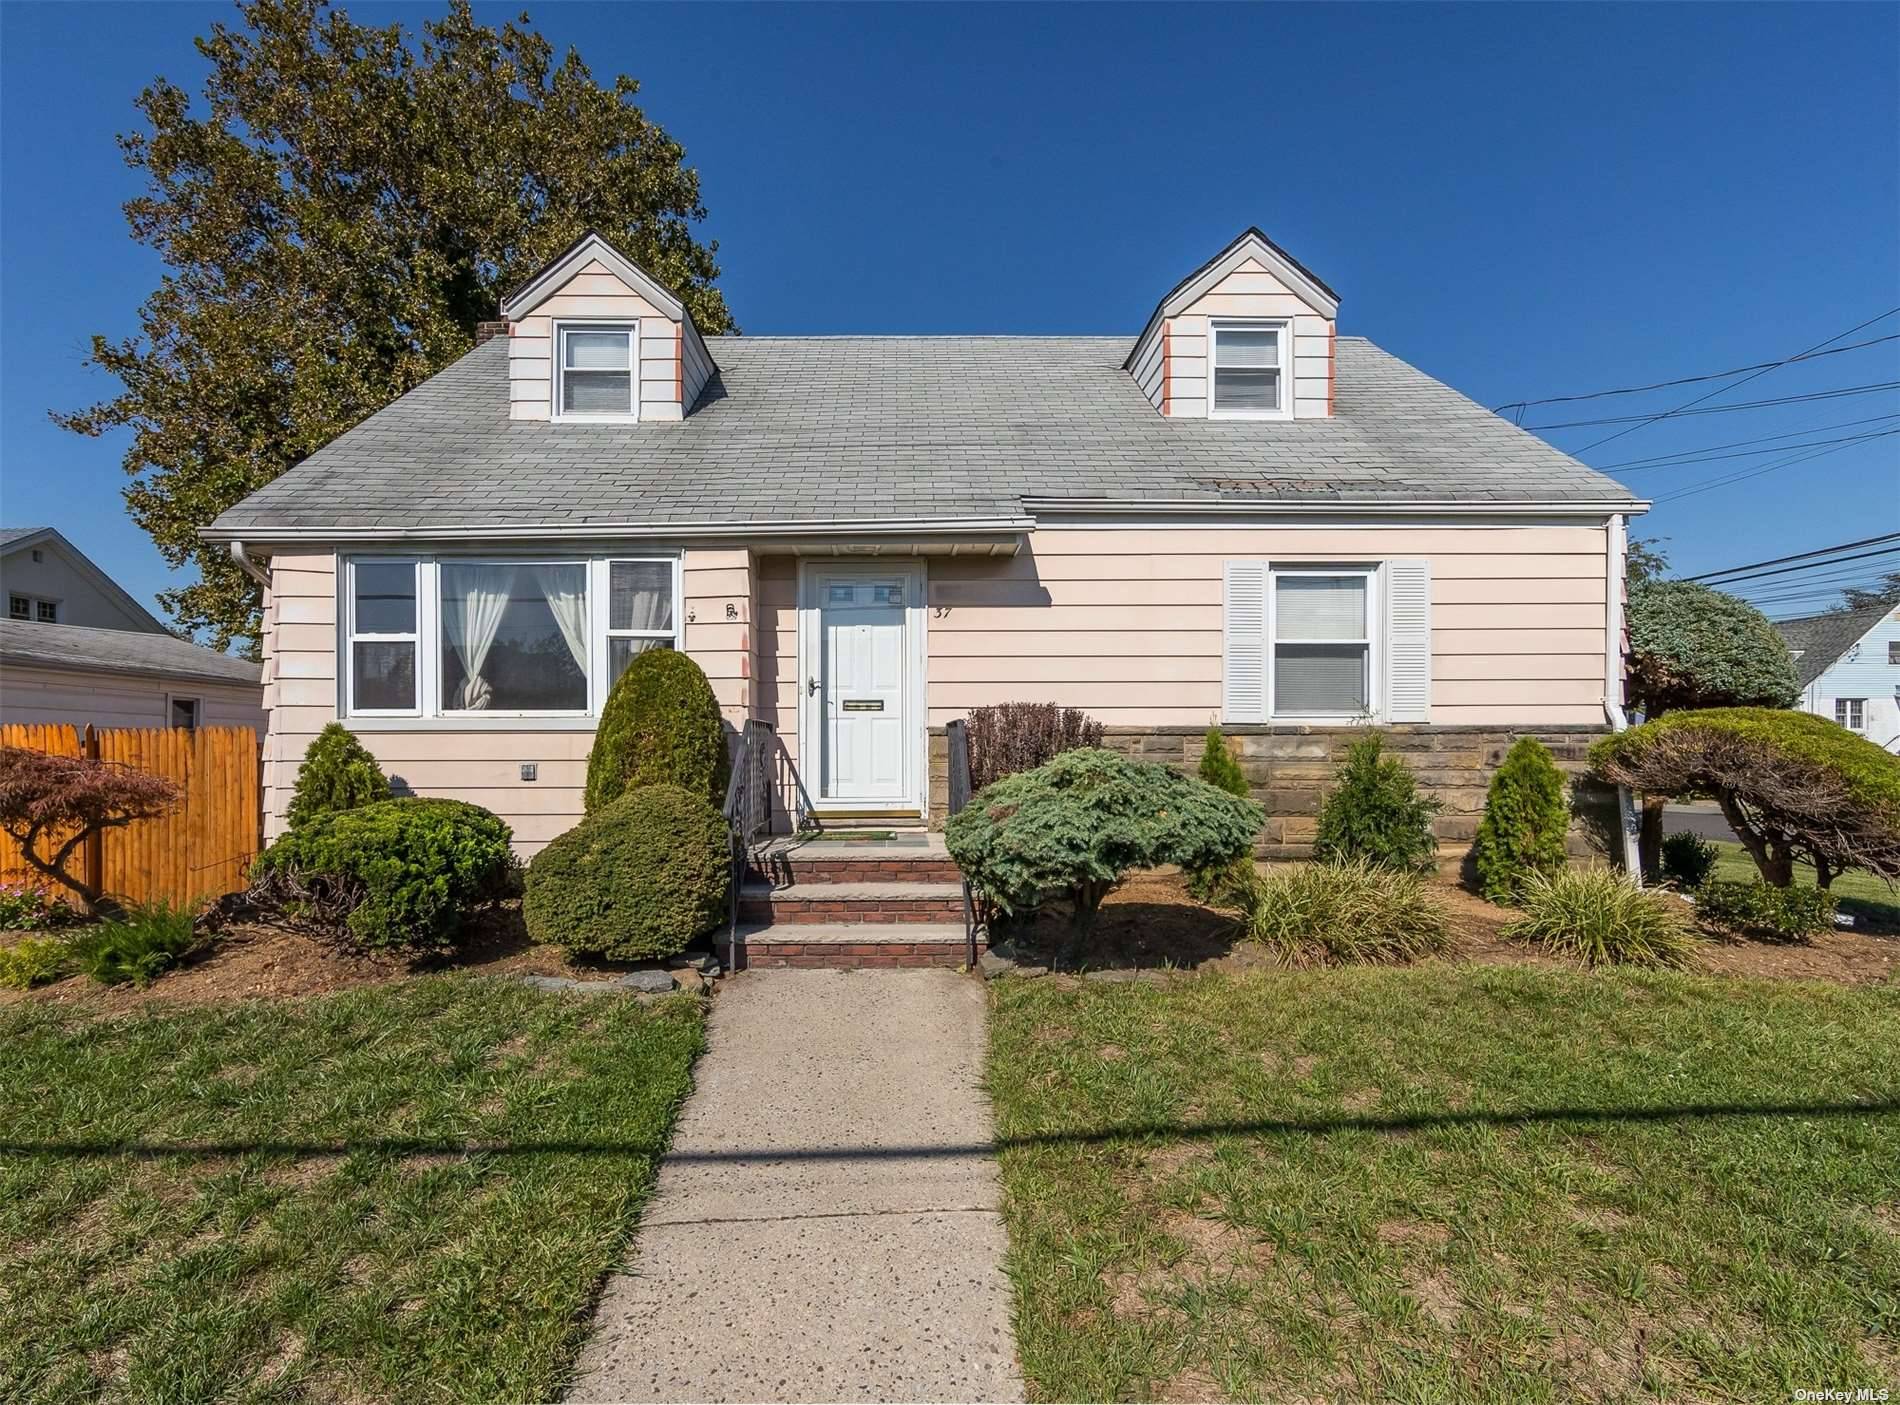 Located in the desirable and charming Village of Malverne, this classic Cape Cod style home with open concept living room and dining room adjoining updated kitchen with new appliances and ...